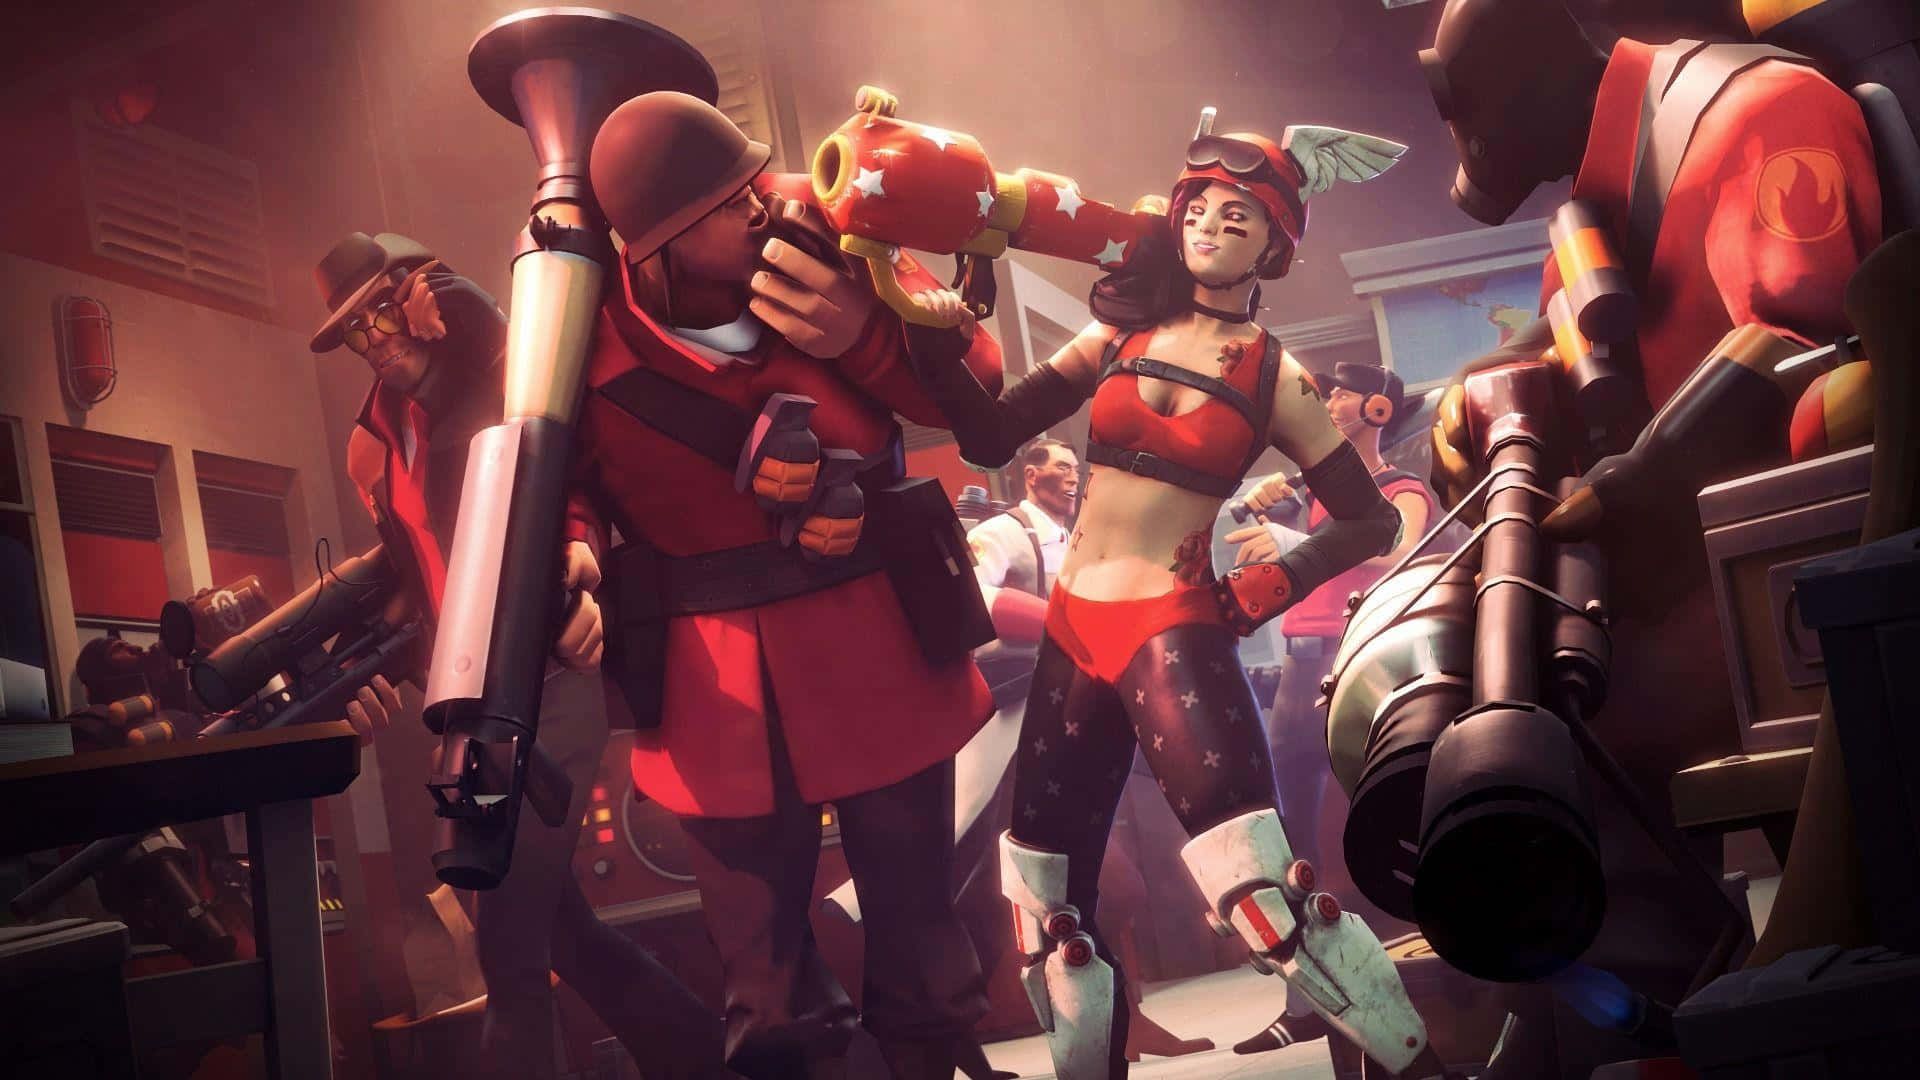 Stunning View of the Team Fortress 2 Battlefield